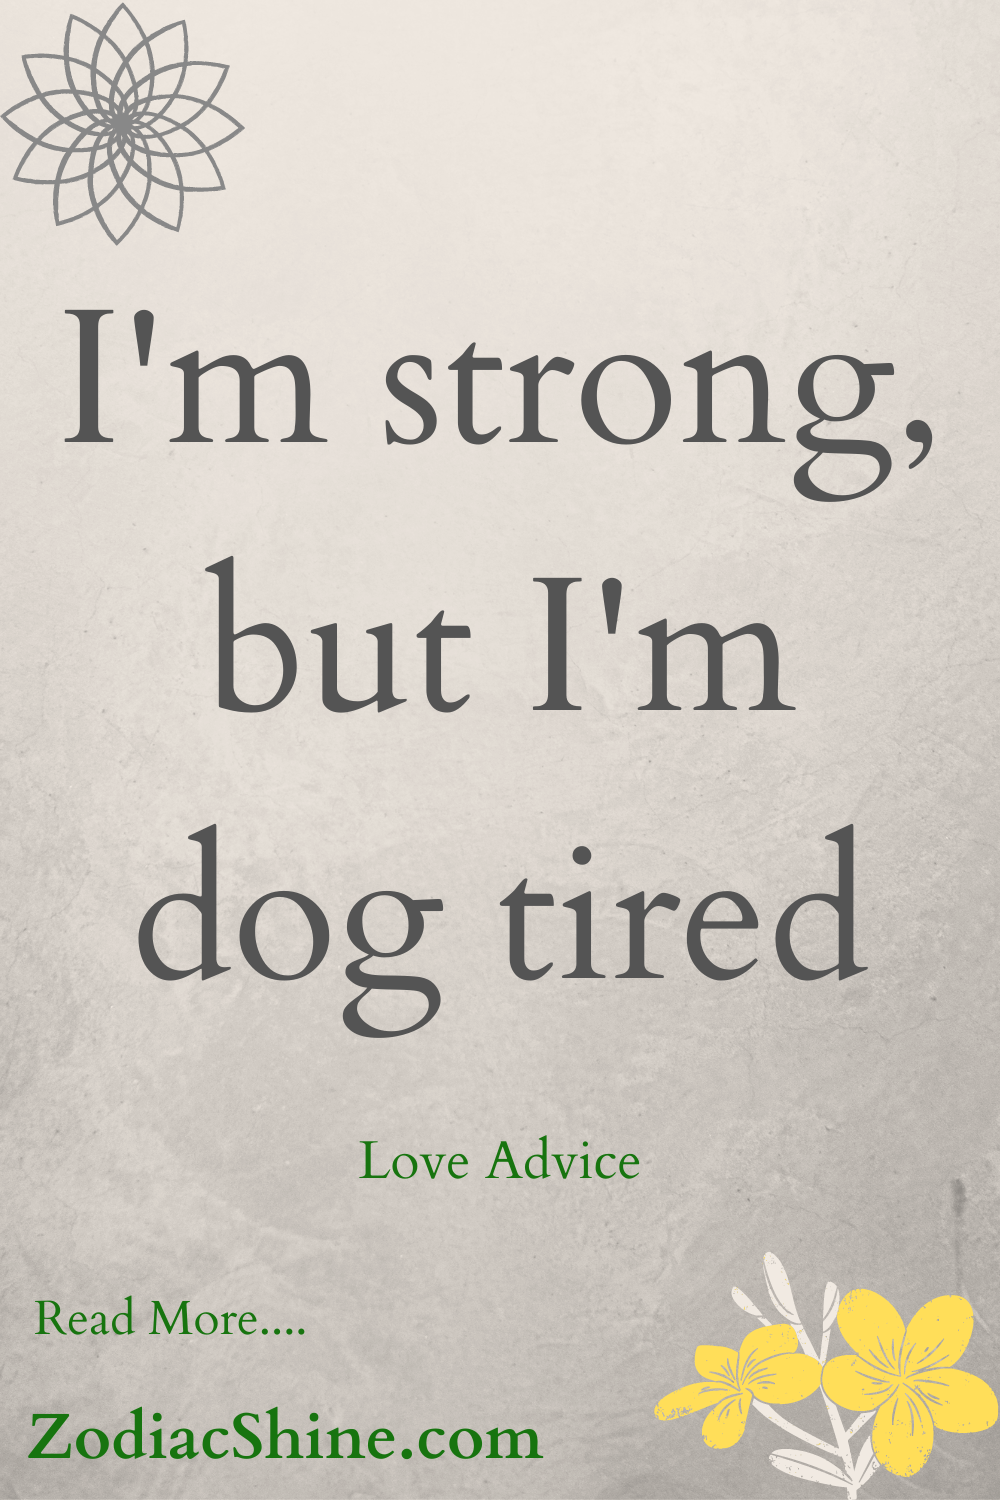 I'm strong but I'm dog tired